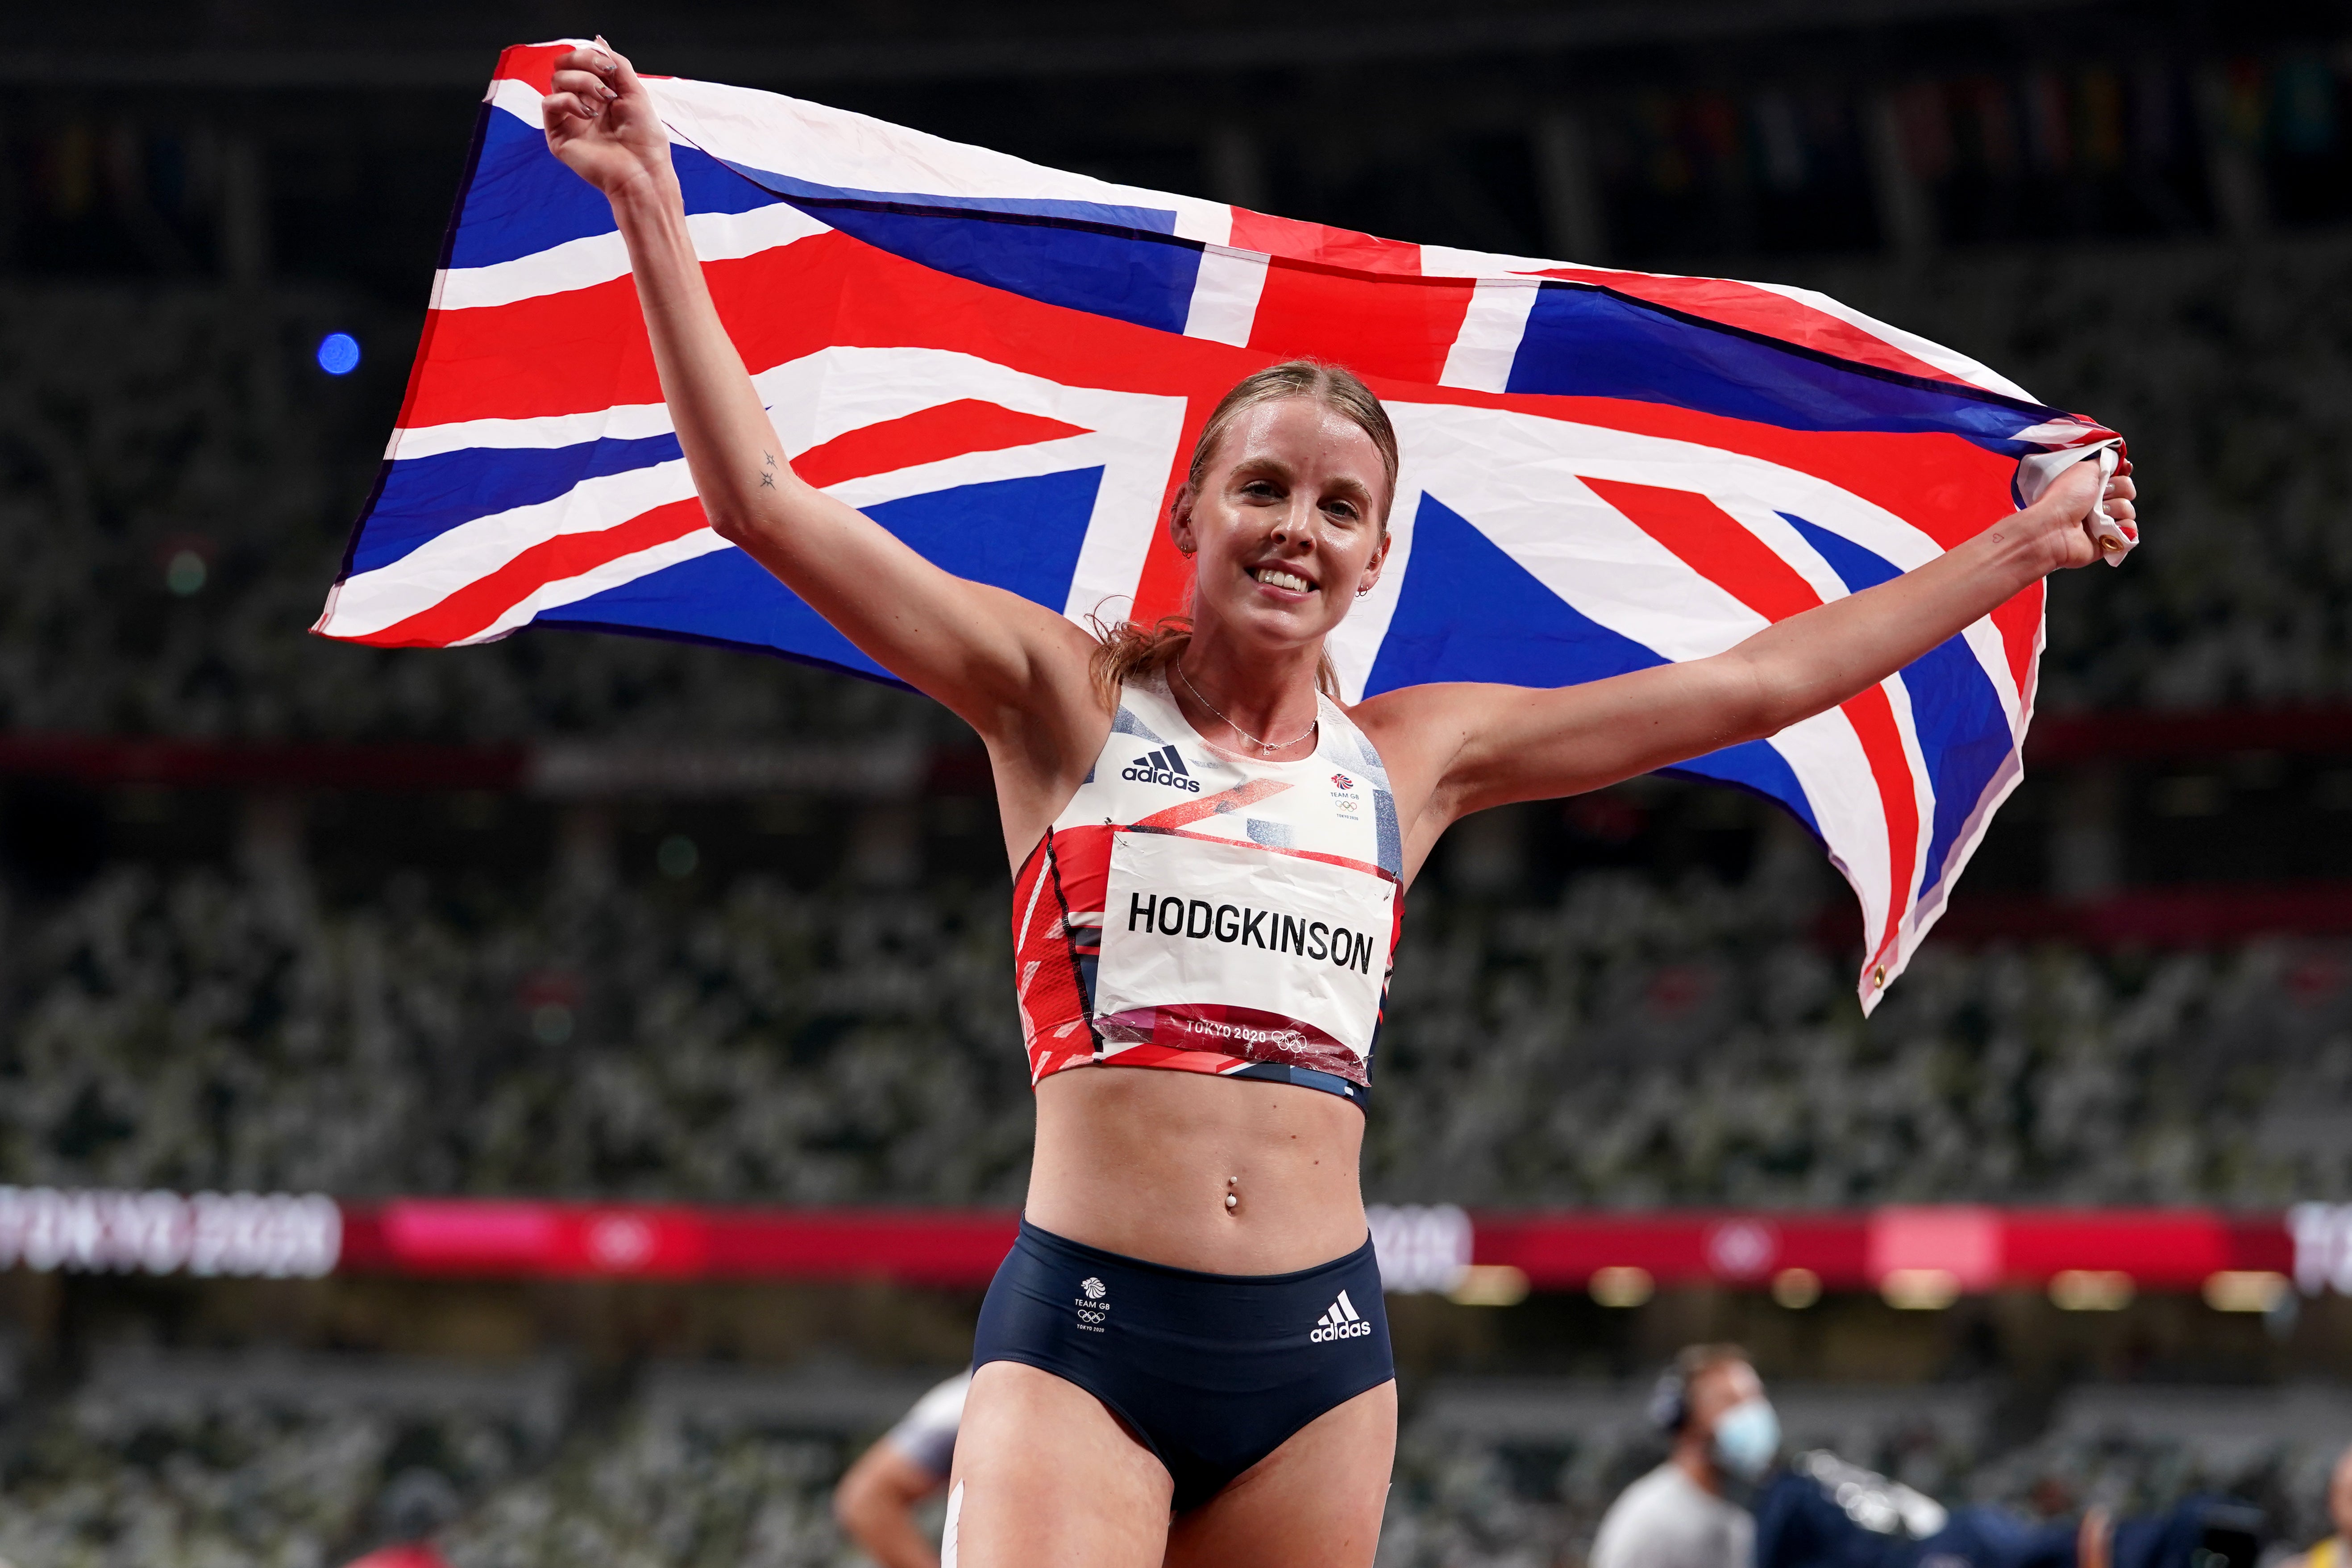 Keely Hodgkinson stormed to 800 metres silver